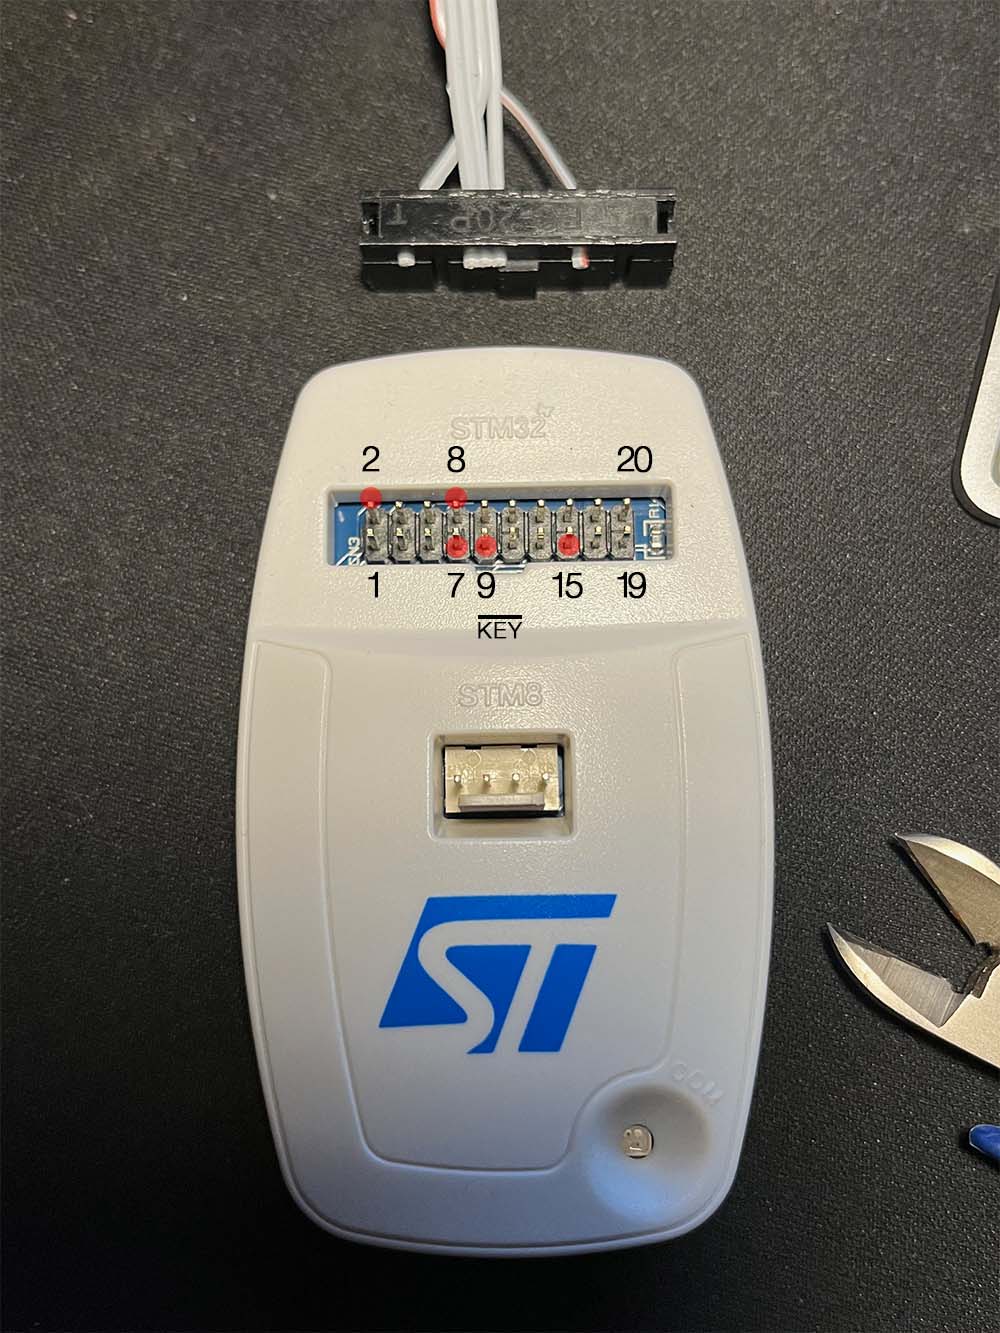 The pins on the ST-link and how they are numbered